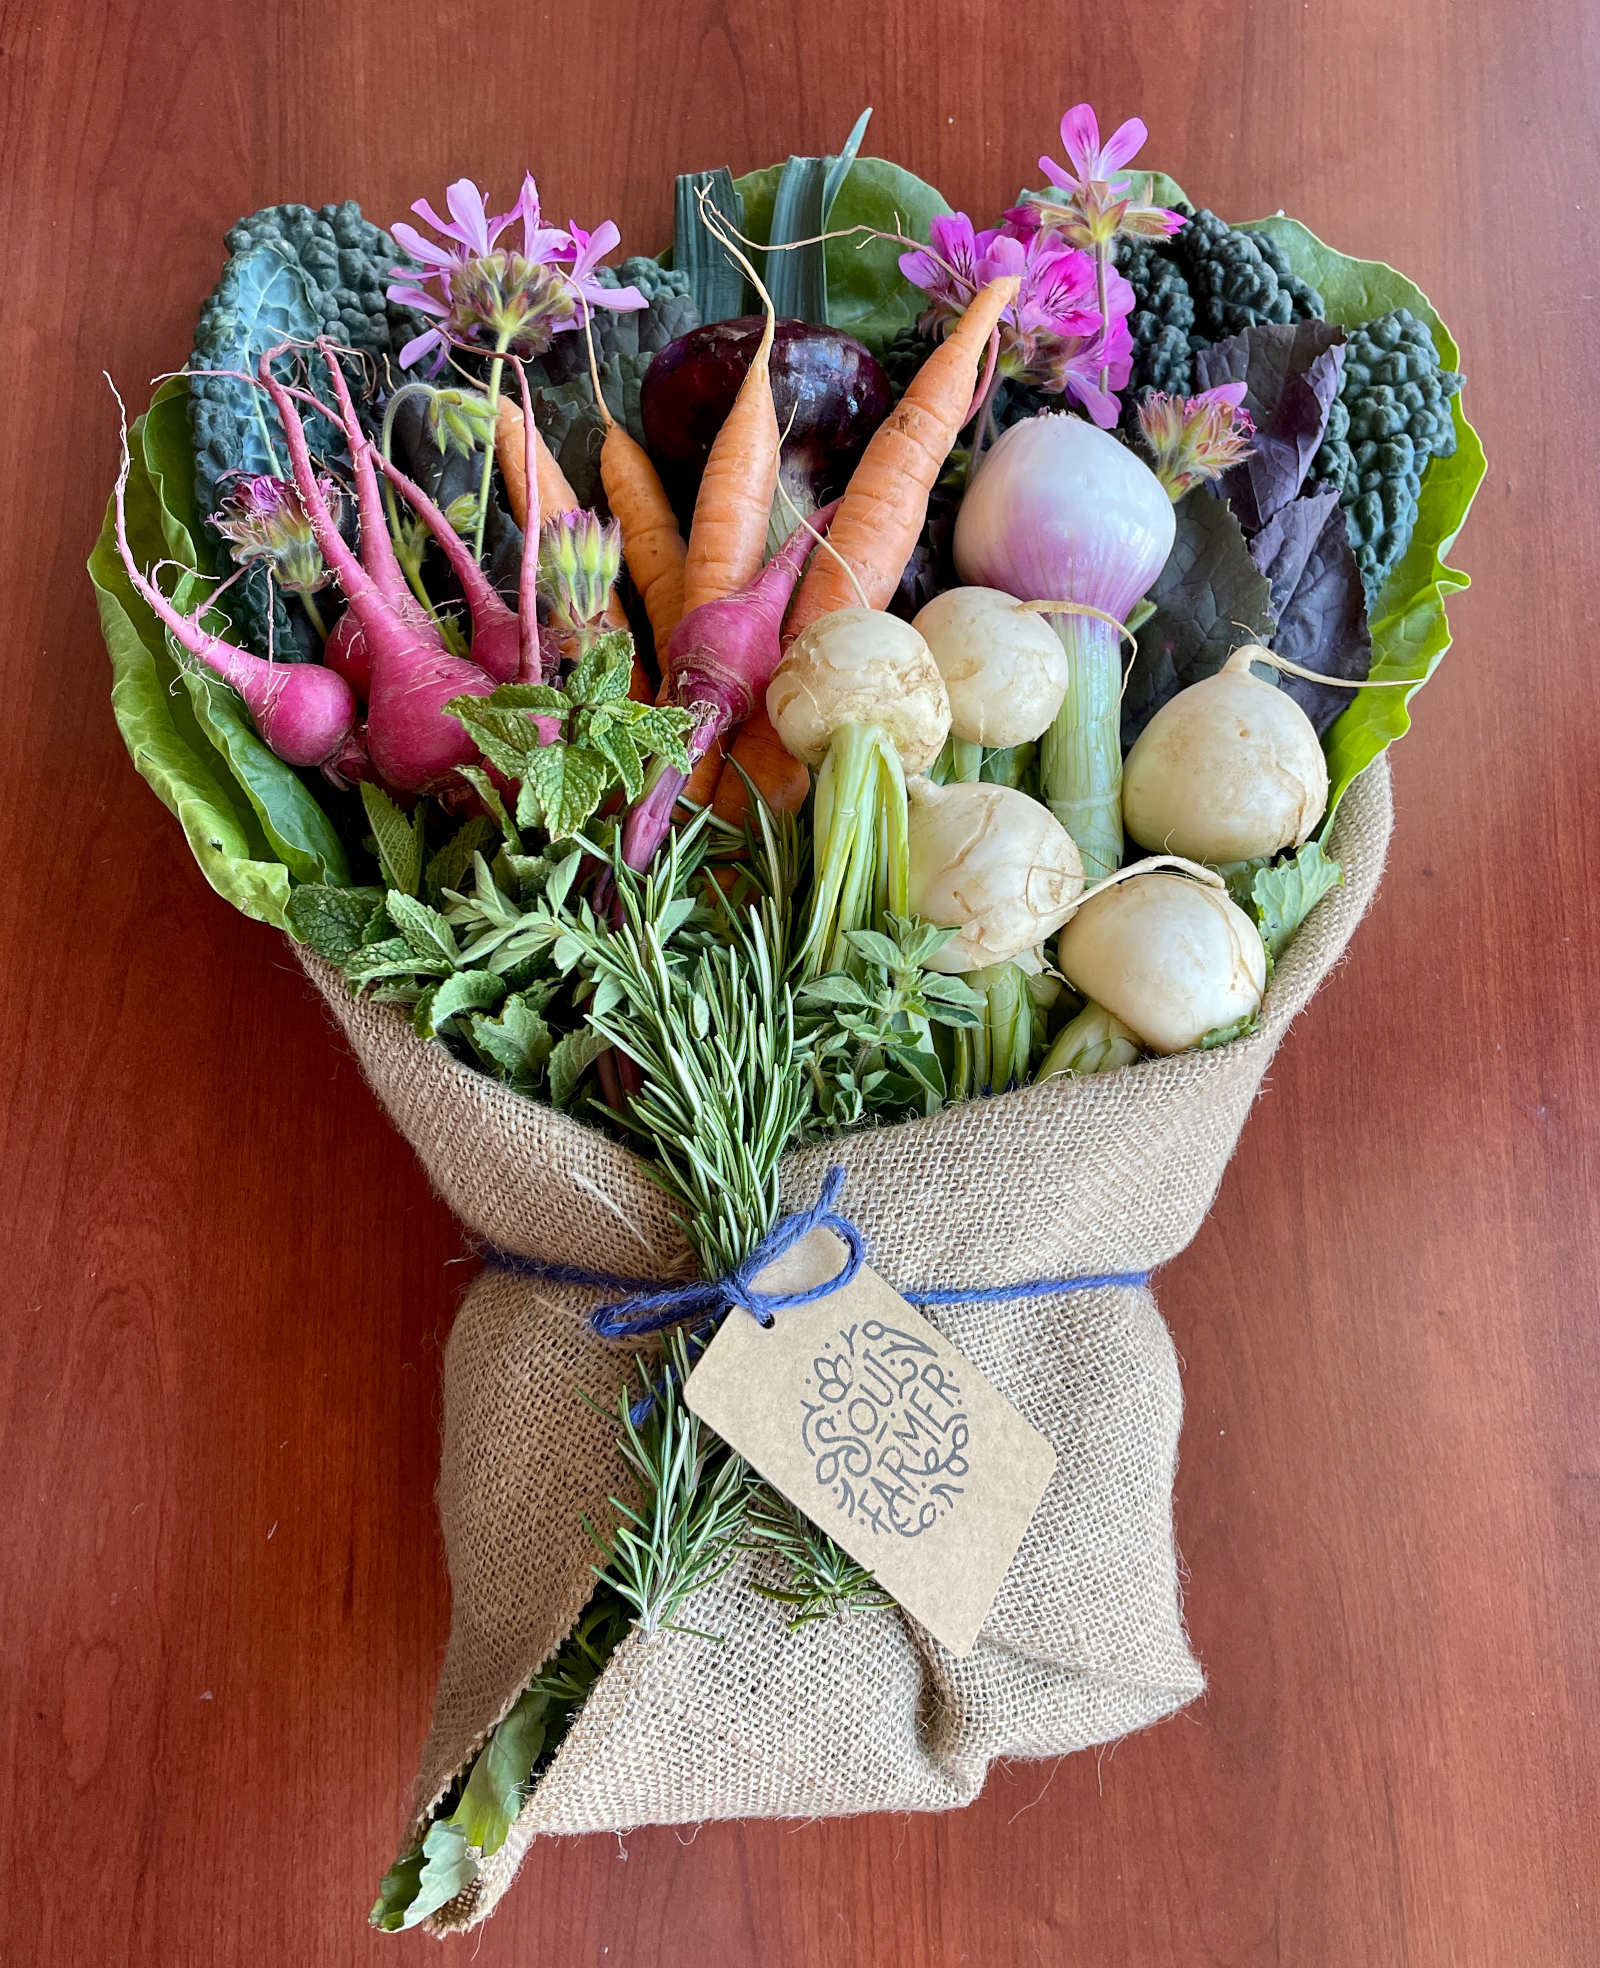 A bouquet of fresh vegetables wrapped in burlap sits on a wooden background